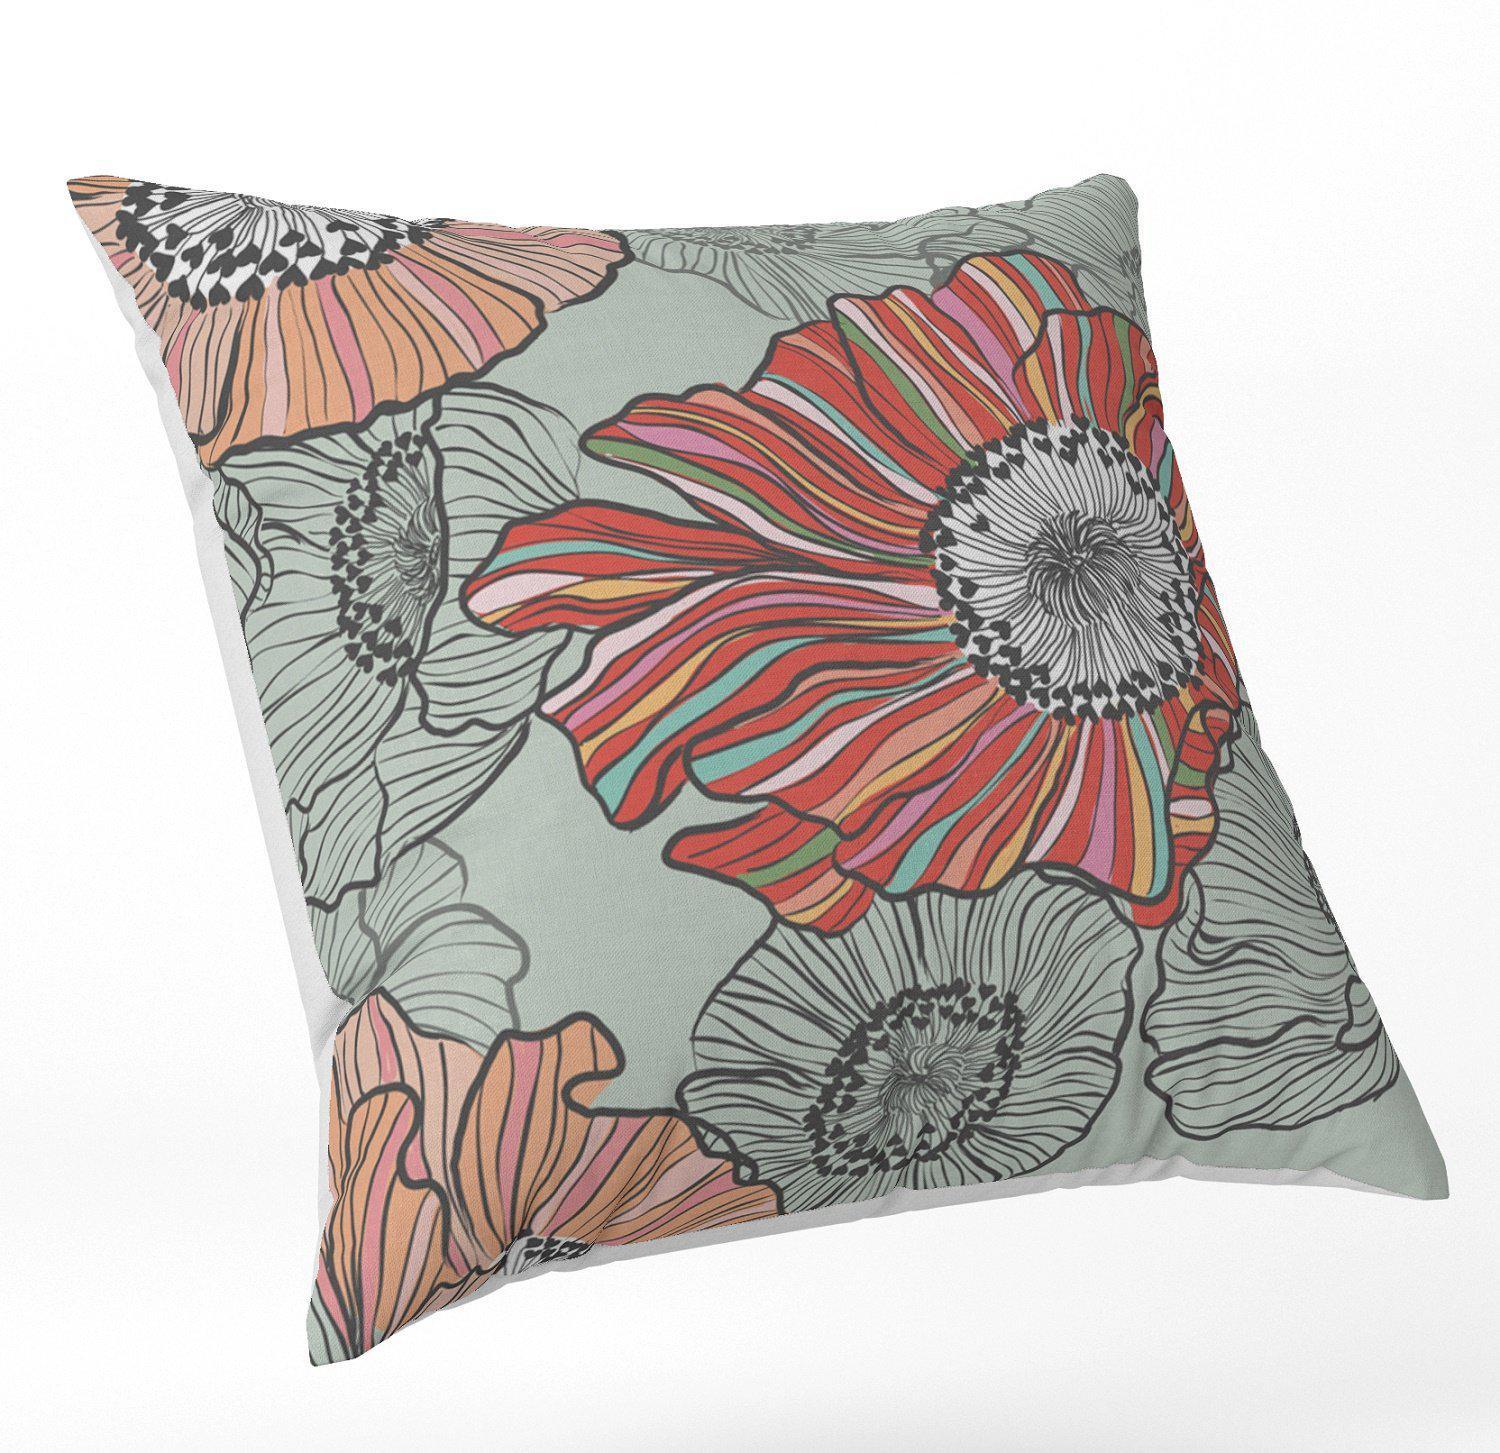 Candy Stripe Poppies (Green) - Funky Art Cushion - Paradise Garden - House Of Turnowsky Pillows - Handmade Cushions UK - WeLoveCushions